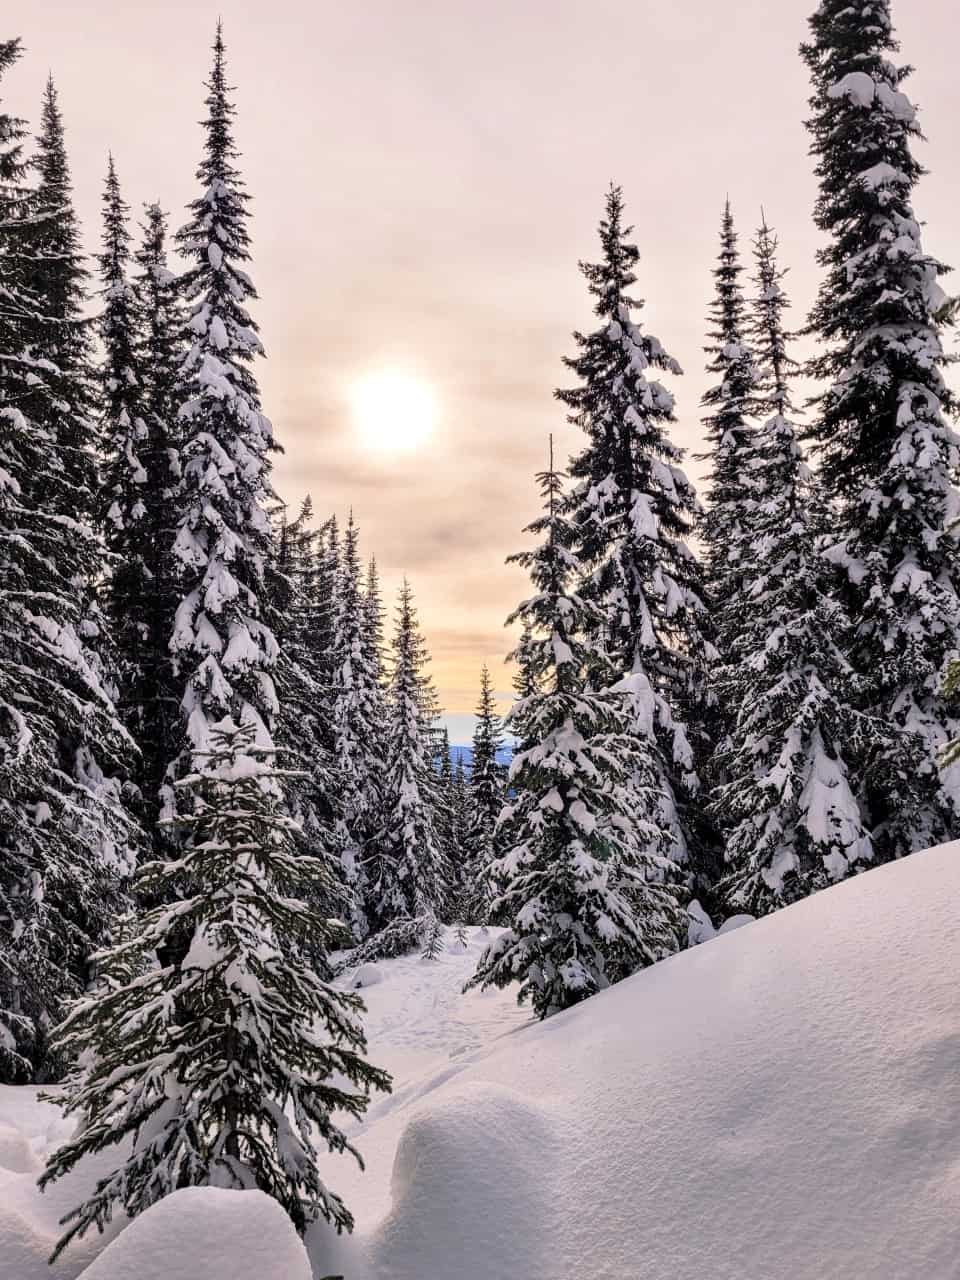 Silverstar Provincial Park - Snowshoeing at Silverstar Provincial Park